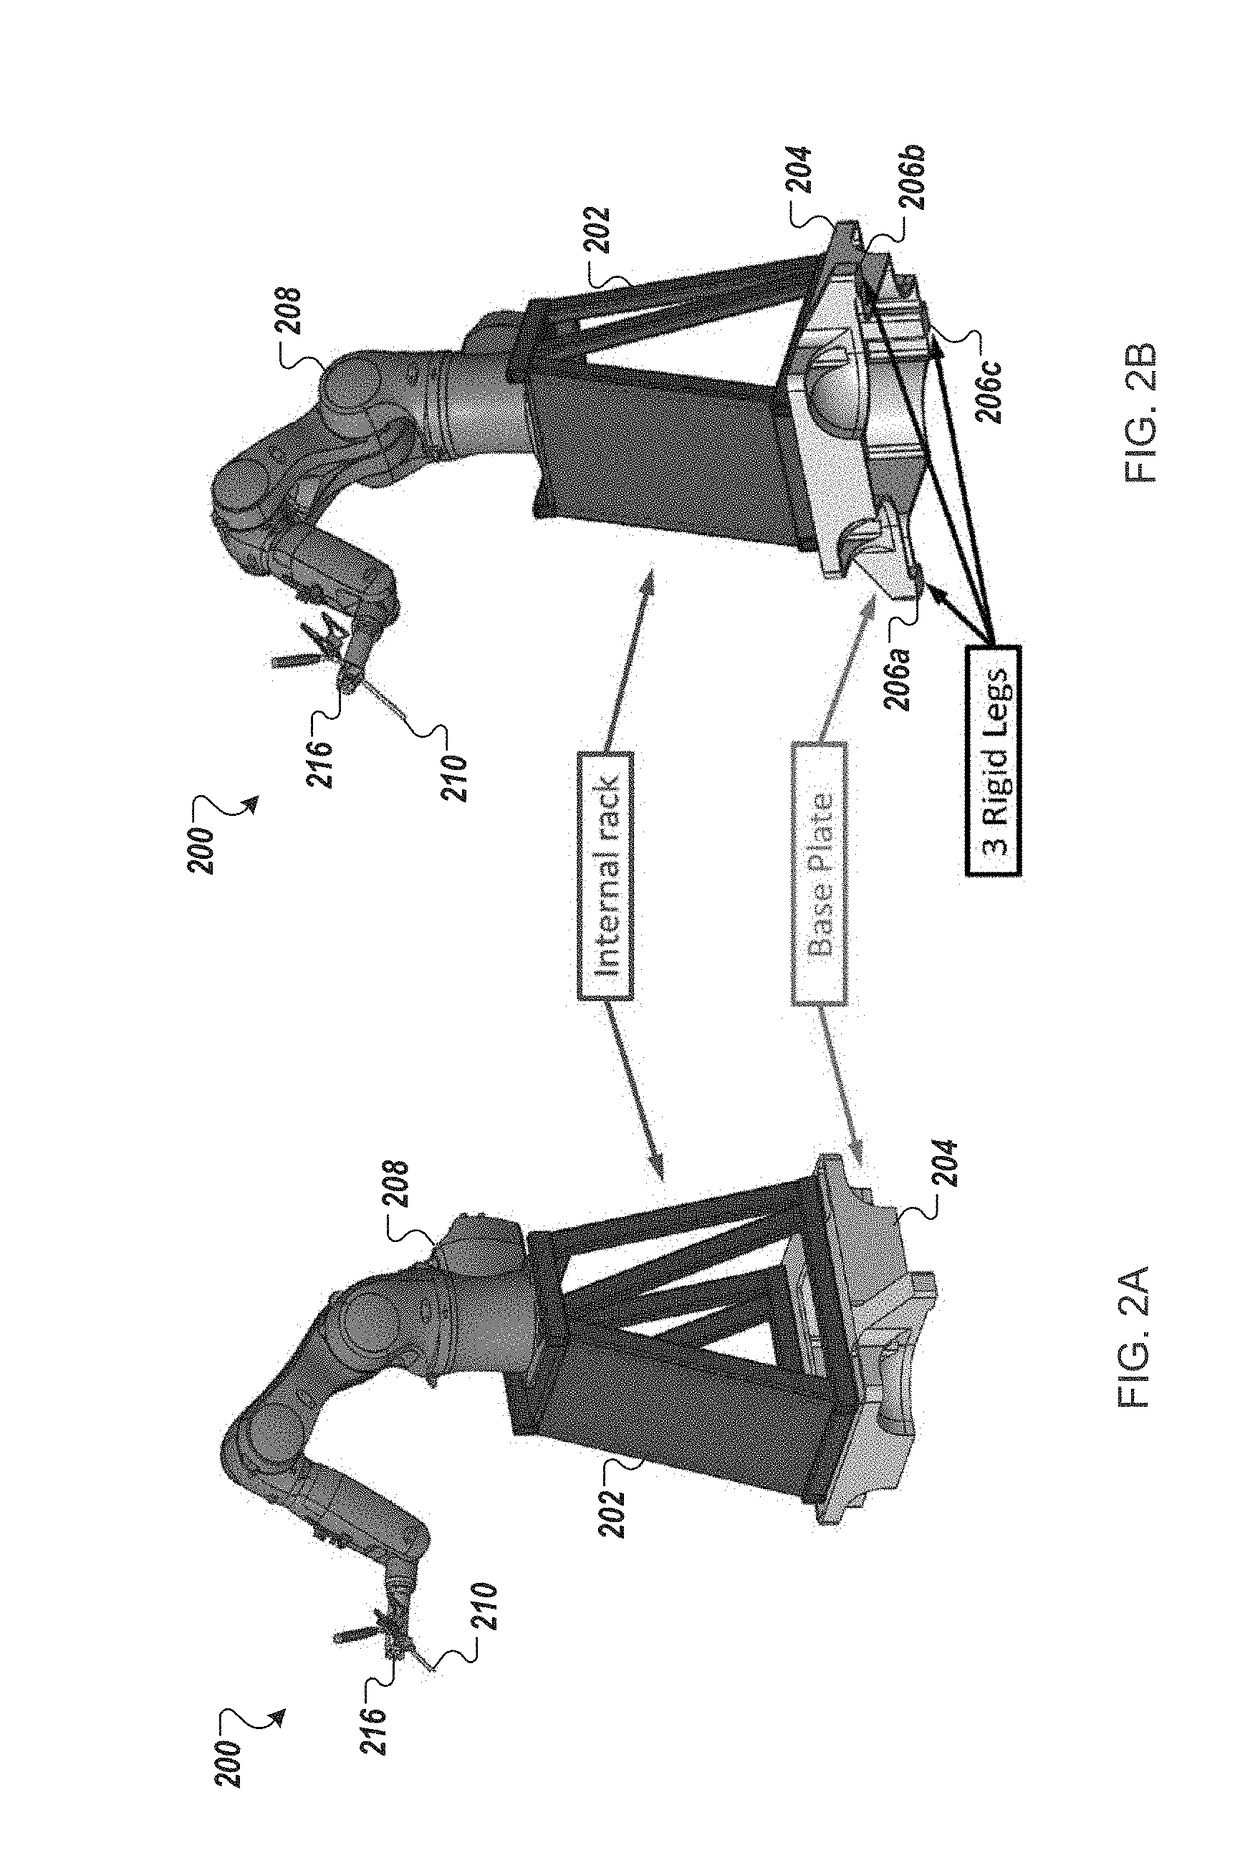 Apparatus, systems, and methods for precise guidance of surgical tools